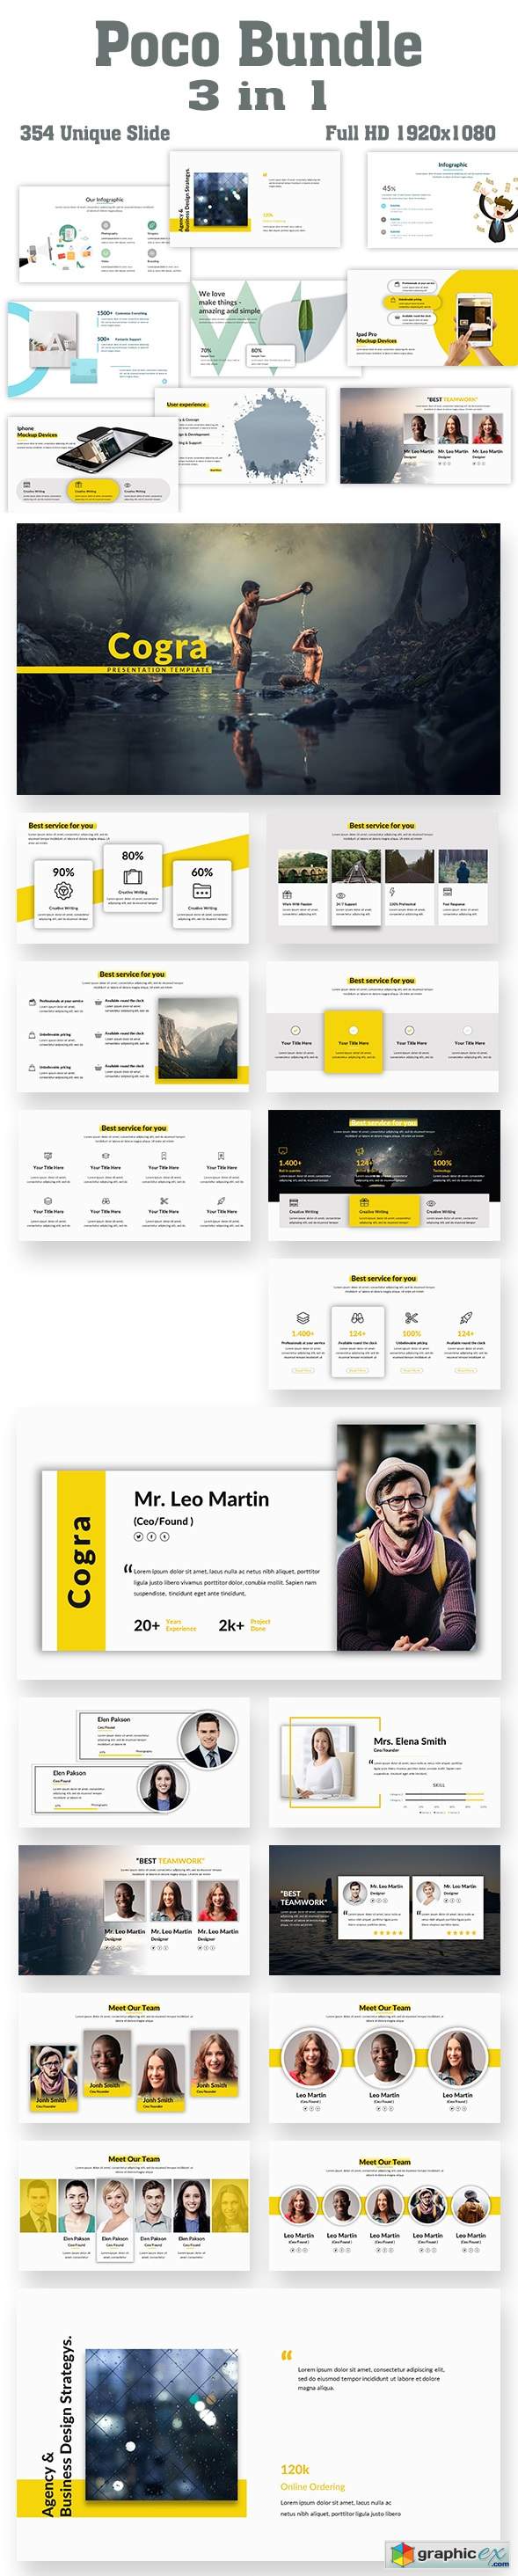 Poco Bundle 3 in 1 PowerPoint Template